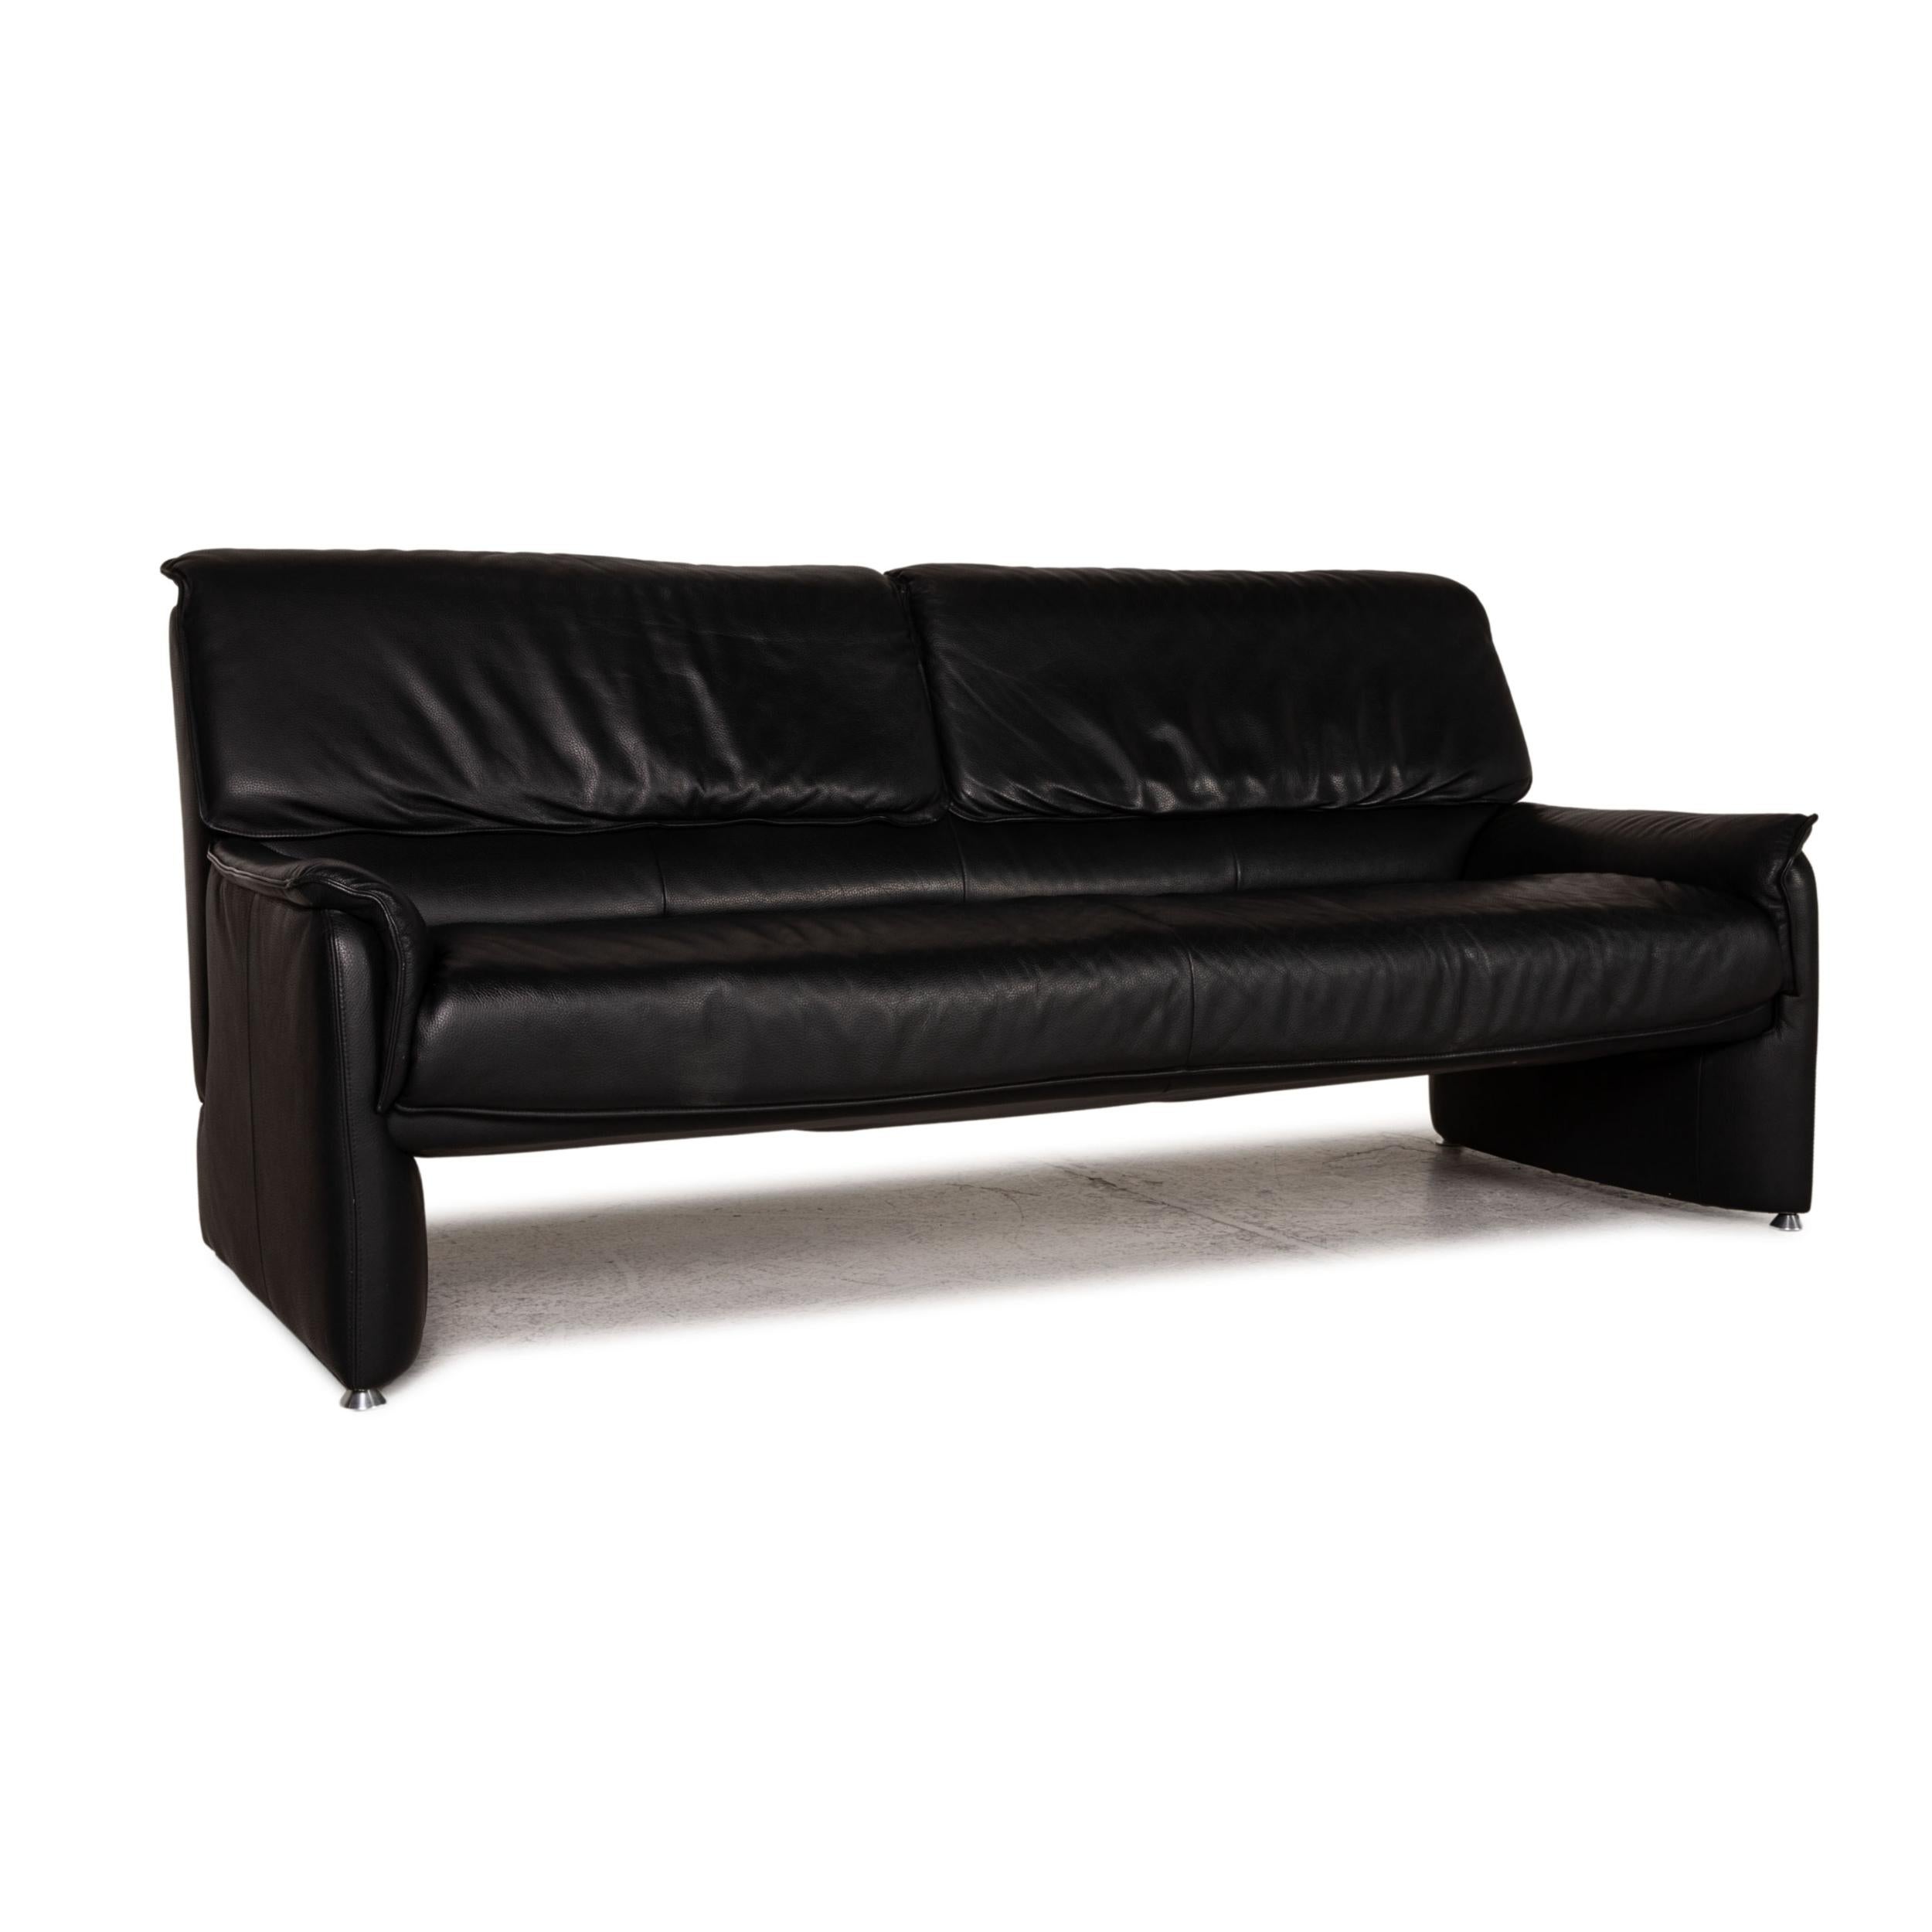 German Laauser Camaro Leather Sofa Black Two Seater Couch For Sale